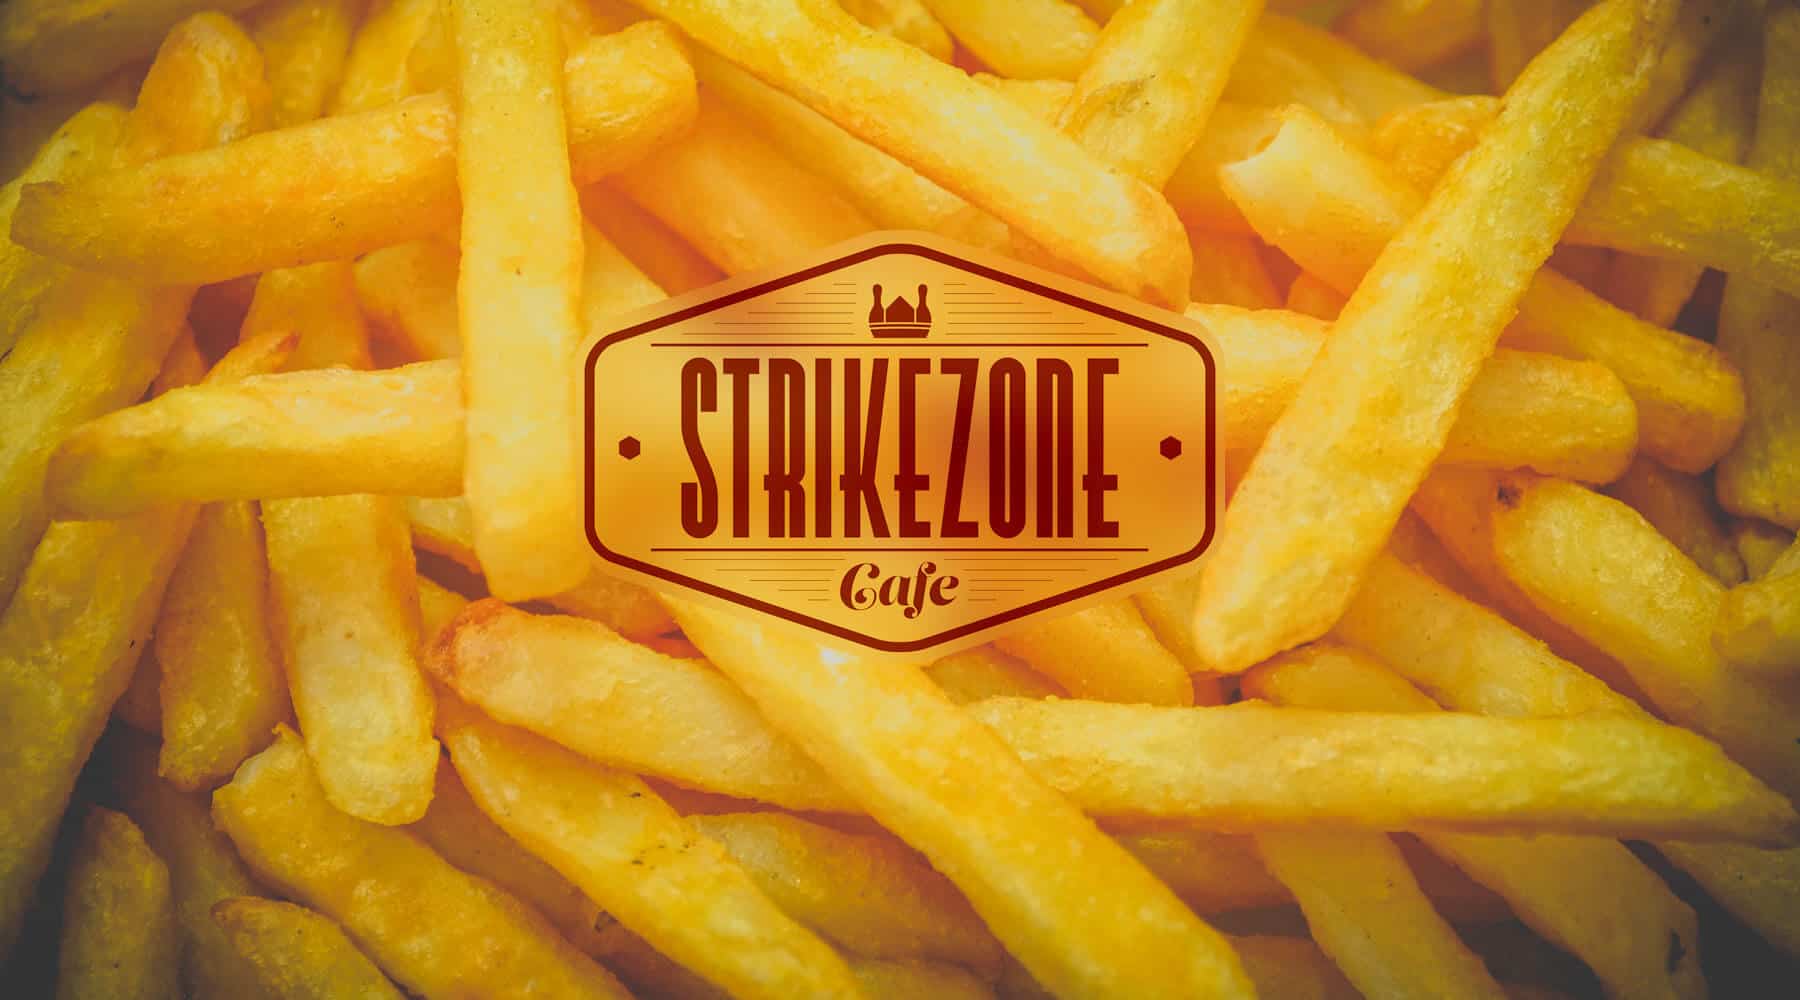 Strikezone Cafe logo on a bed of french fries